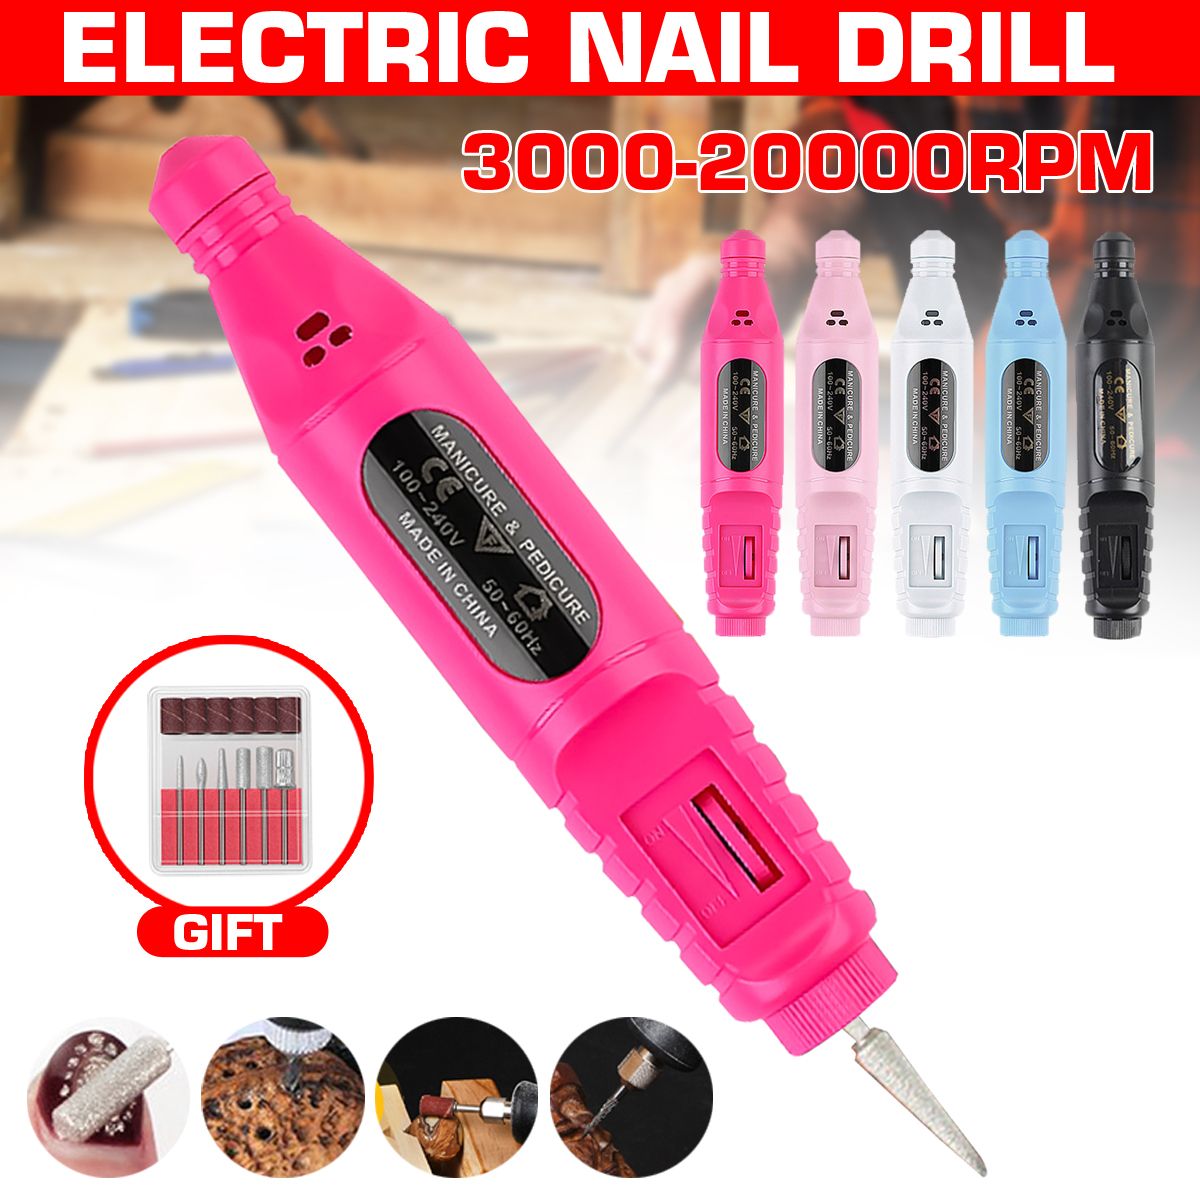 3000-20000-Adjustable-Speed-Pedicure-Manicure-Nail-Polisher-Drill-Electric-Nail-Drill-Machine-USB-Ch-1693708